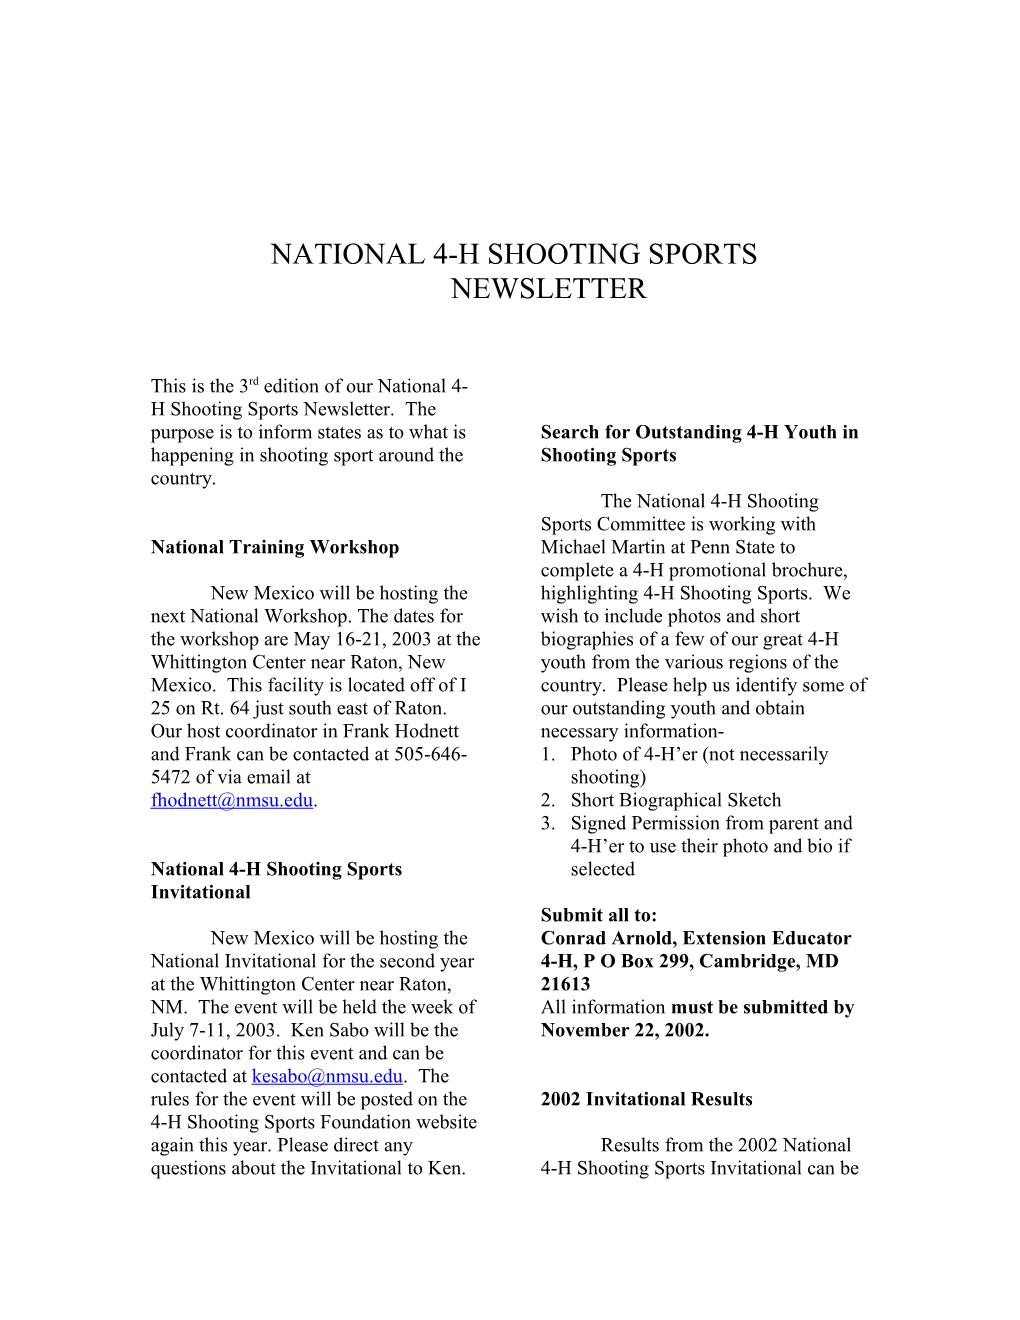 National 4-H Shooting Sports